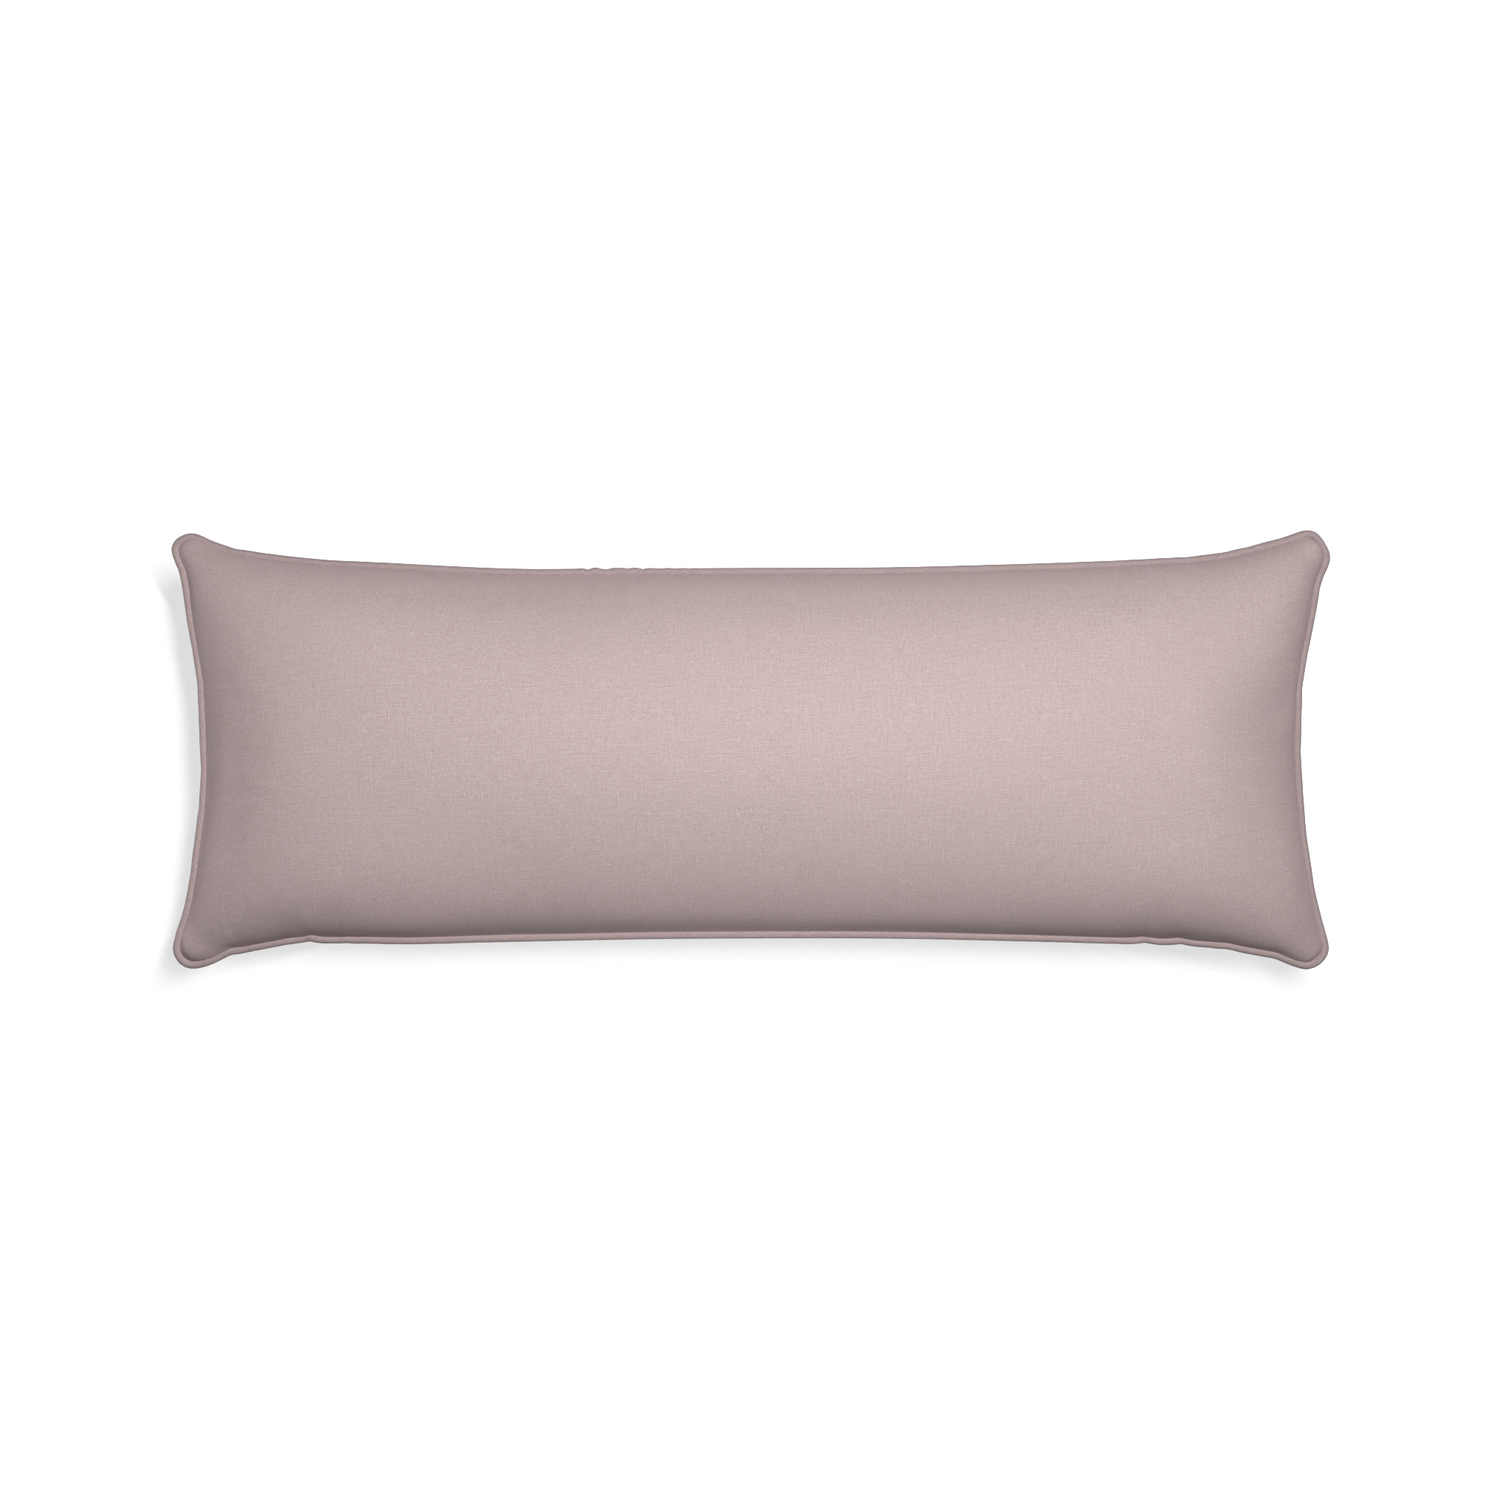 Xl-lumbar orchid custom mauve pinkpillow with orchid piping on white background